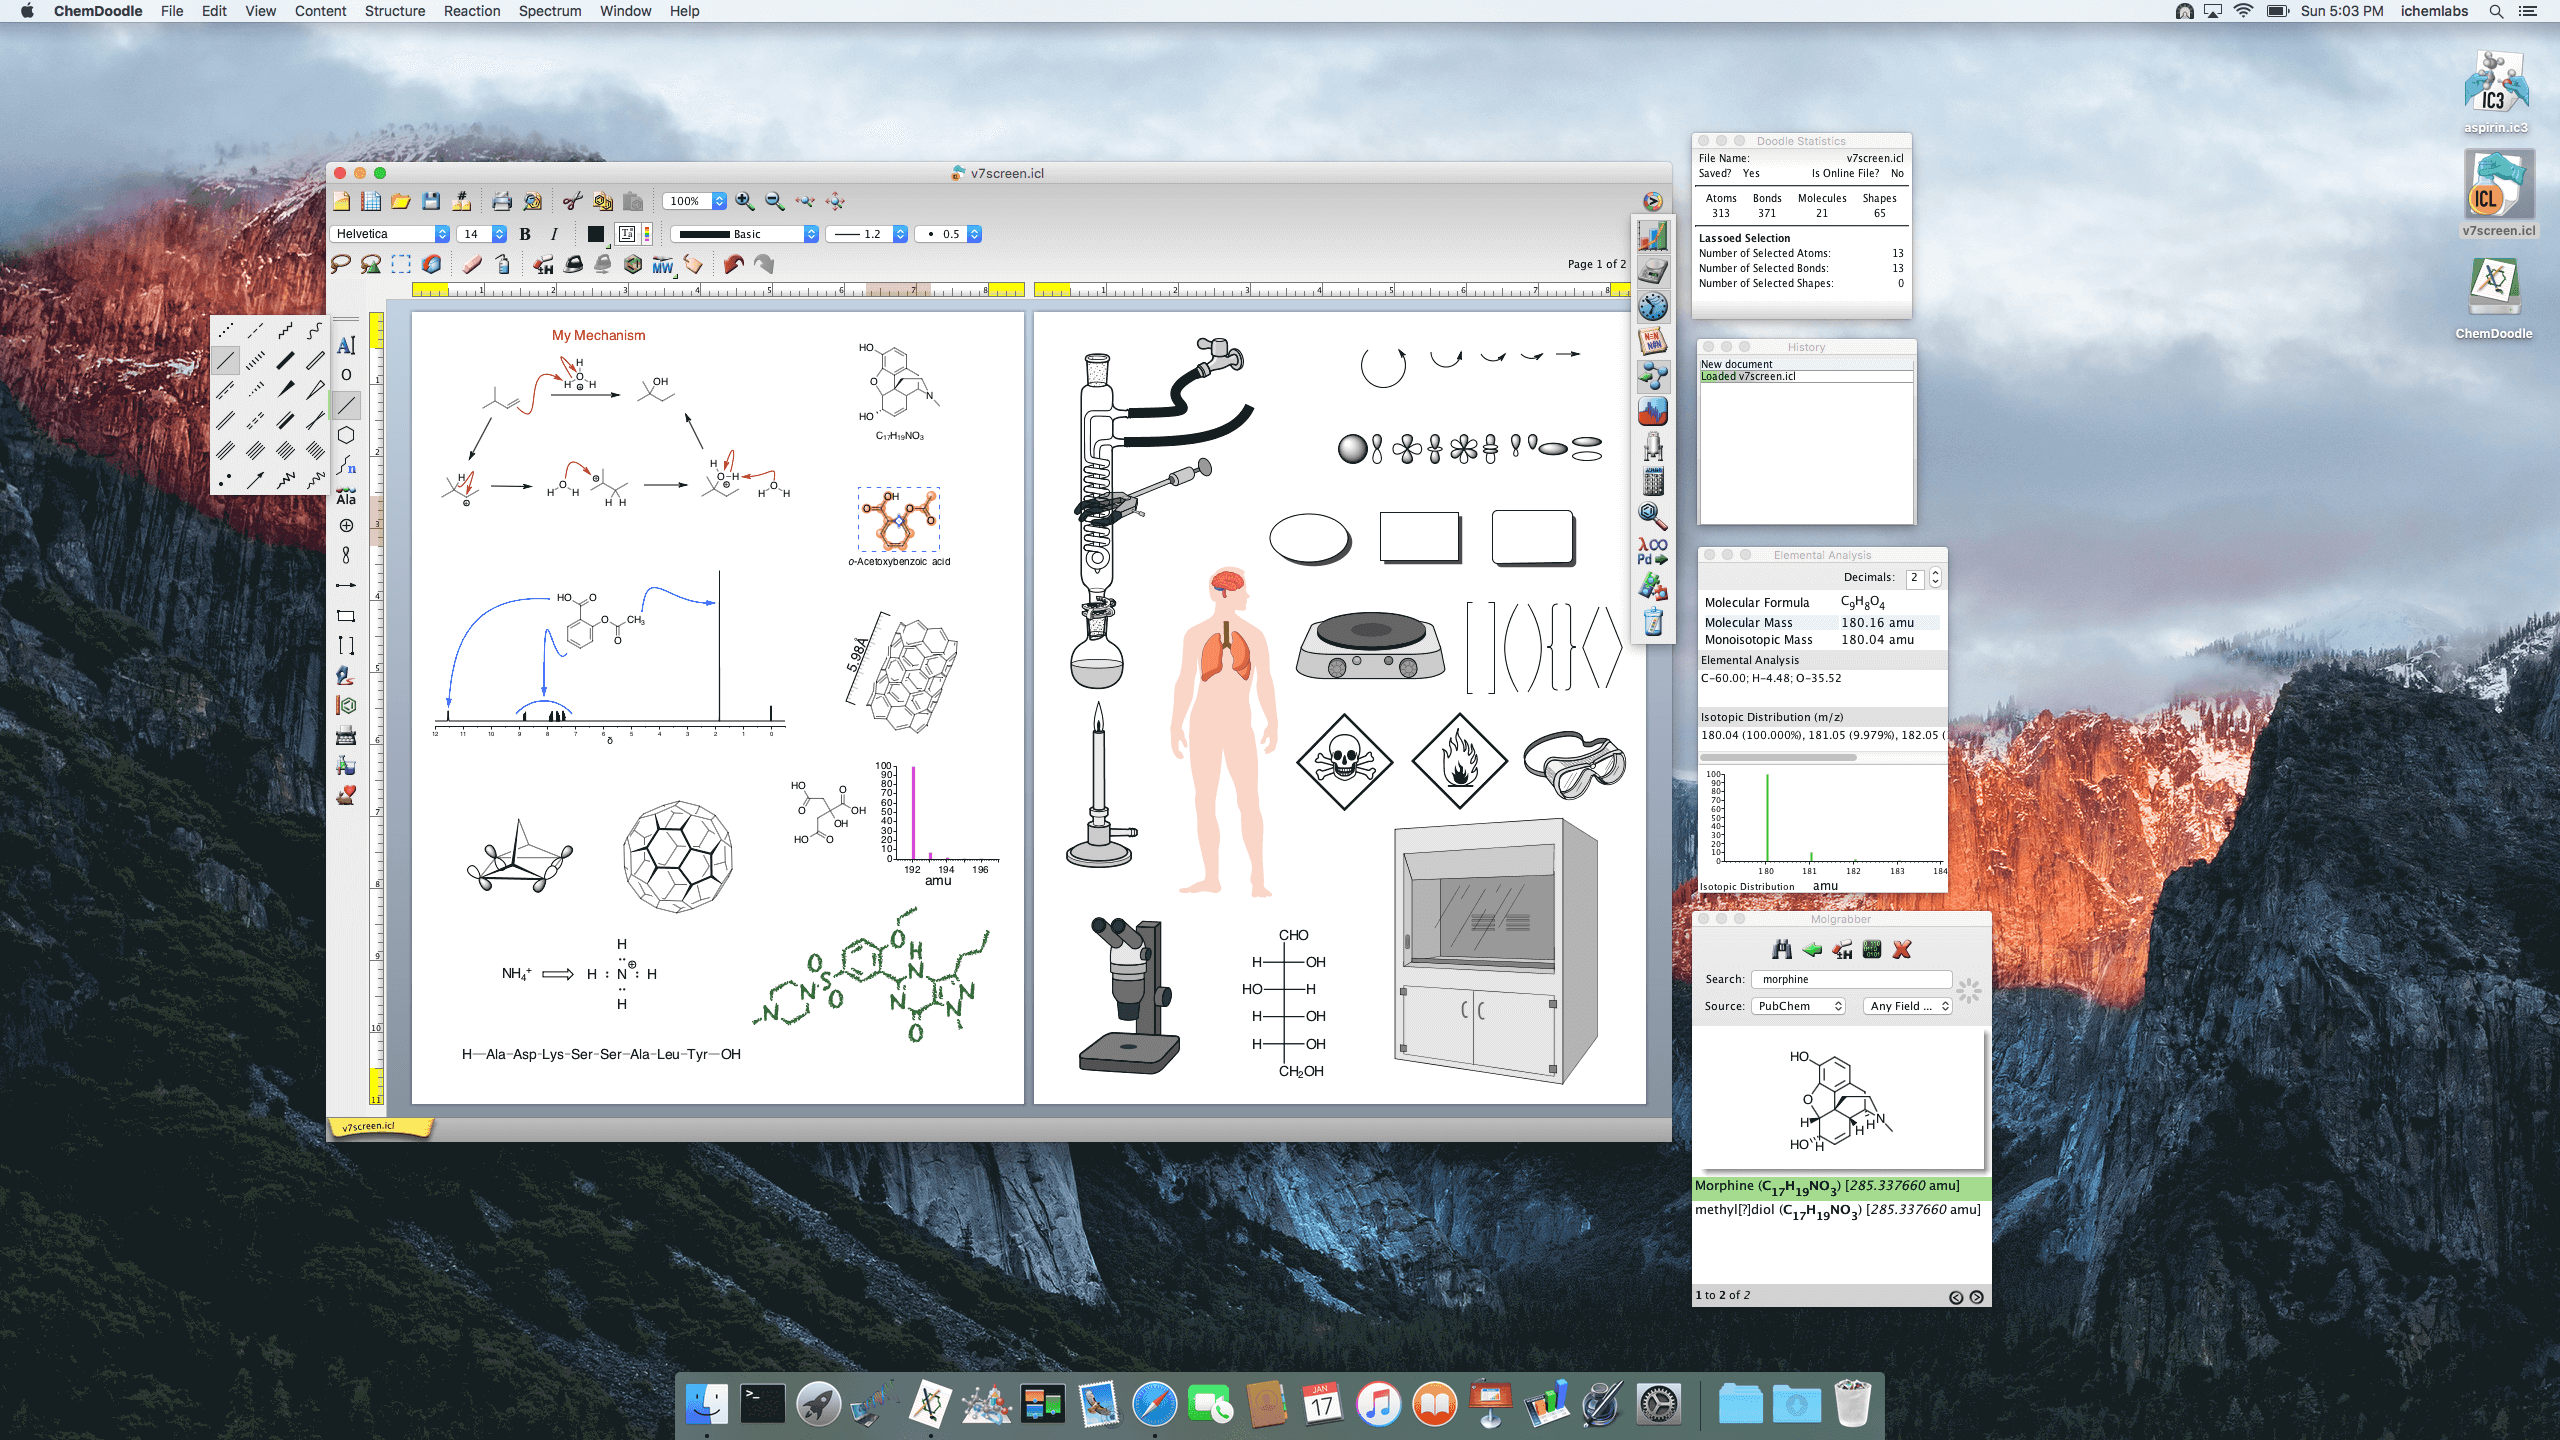 chemdoodle on high resolution screen